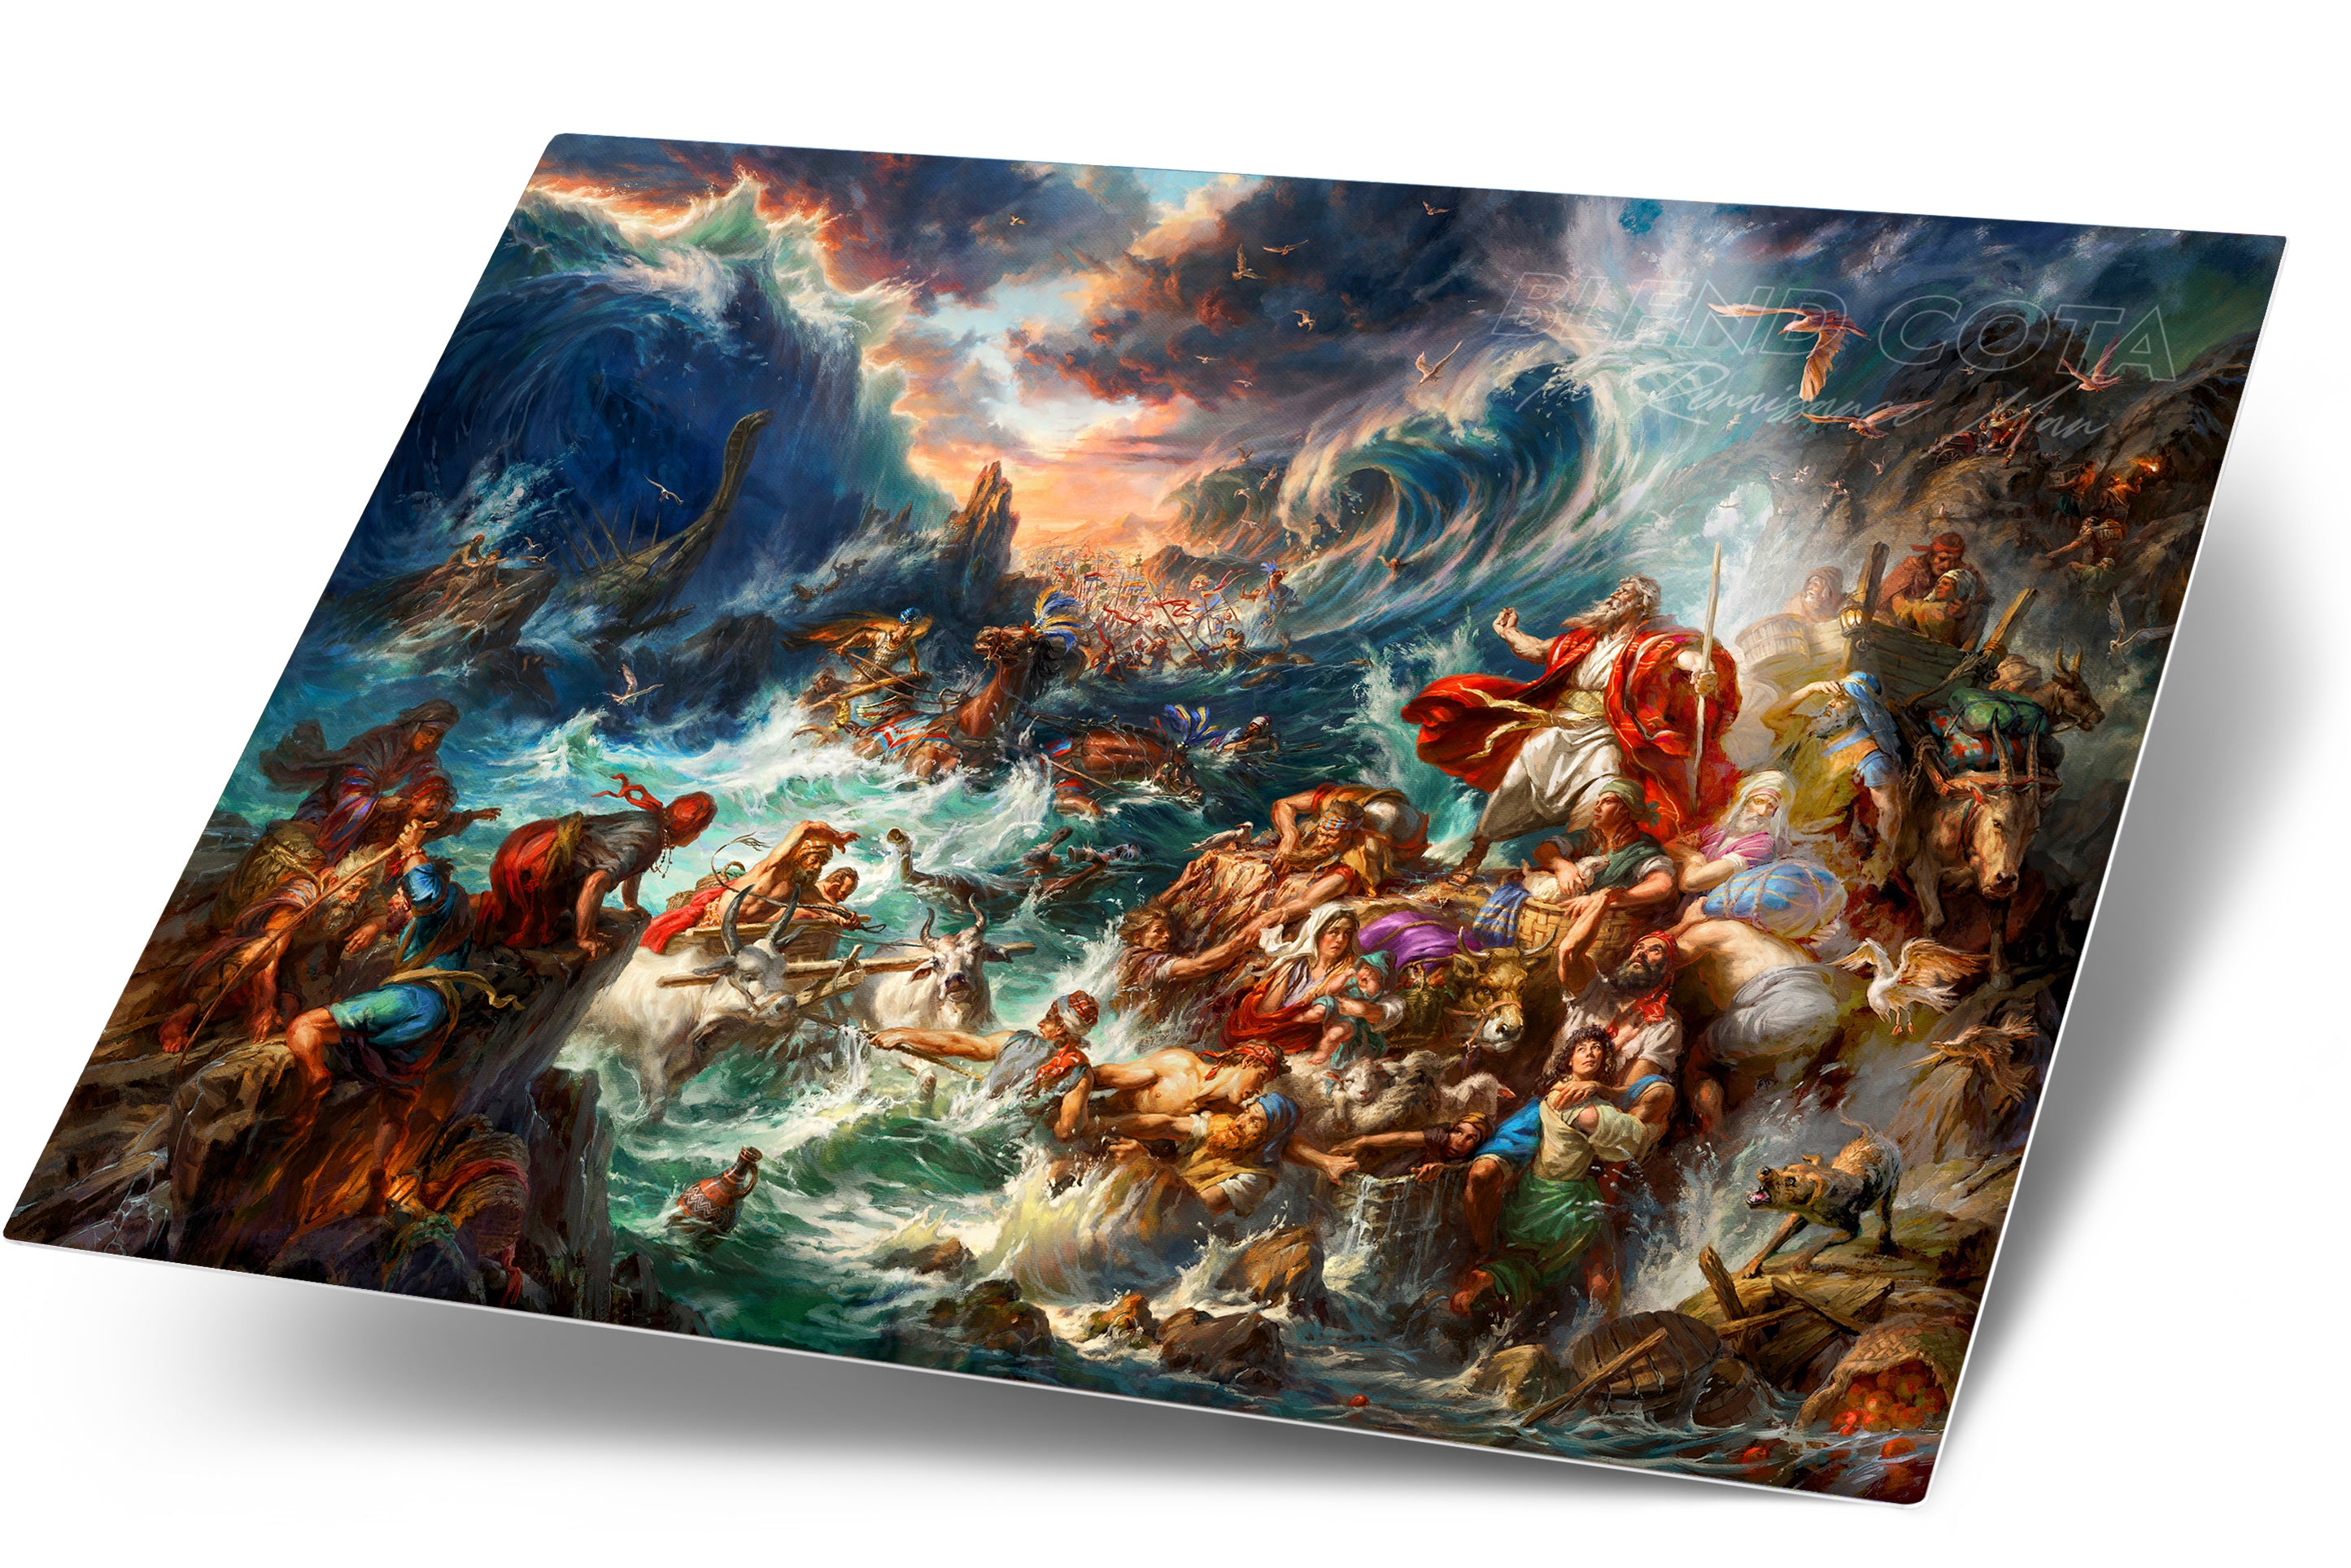 Nothing Is Impossible | Moses Parting The Red Sea - Blend Cota Art Print on Metal - Blend Cota Studios